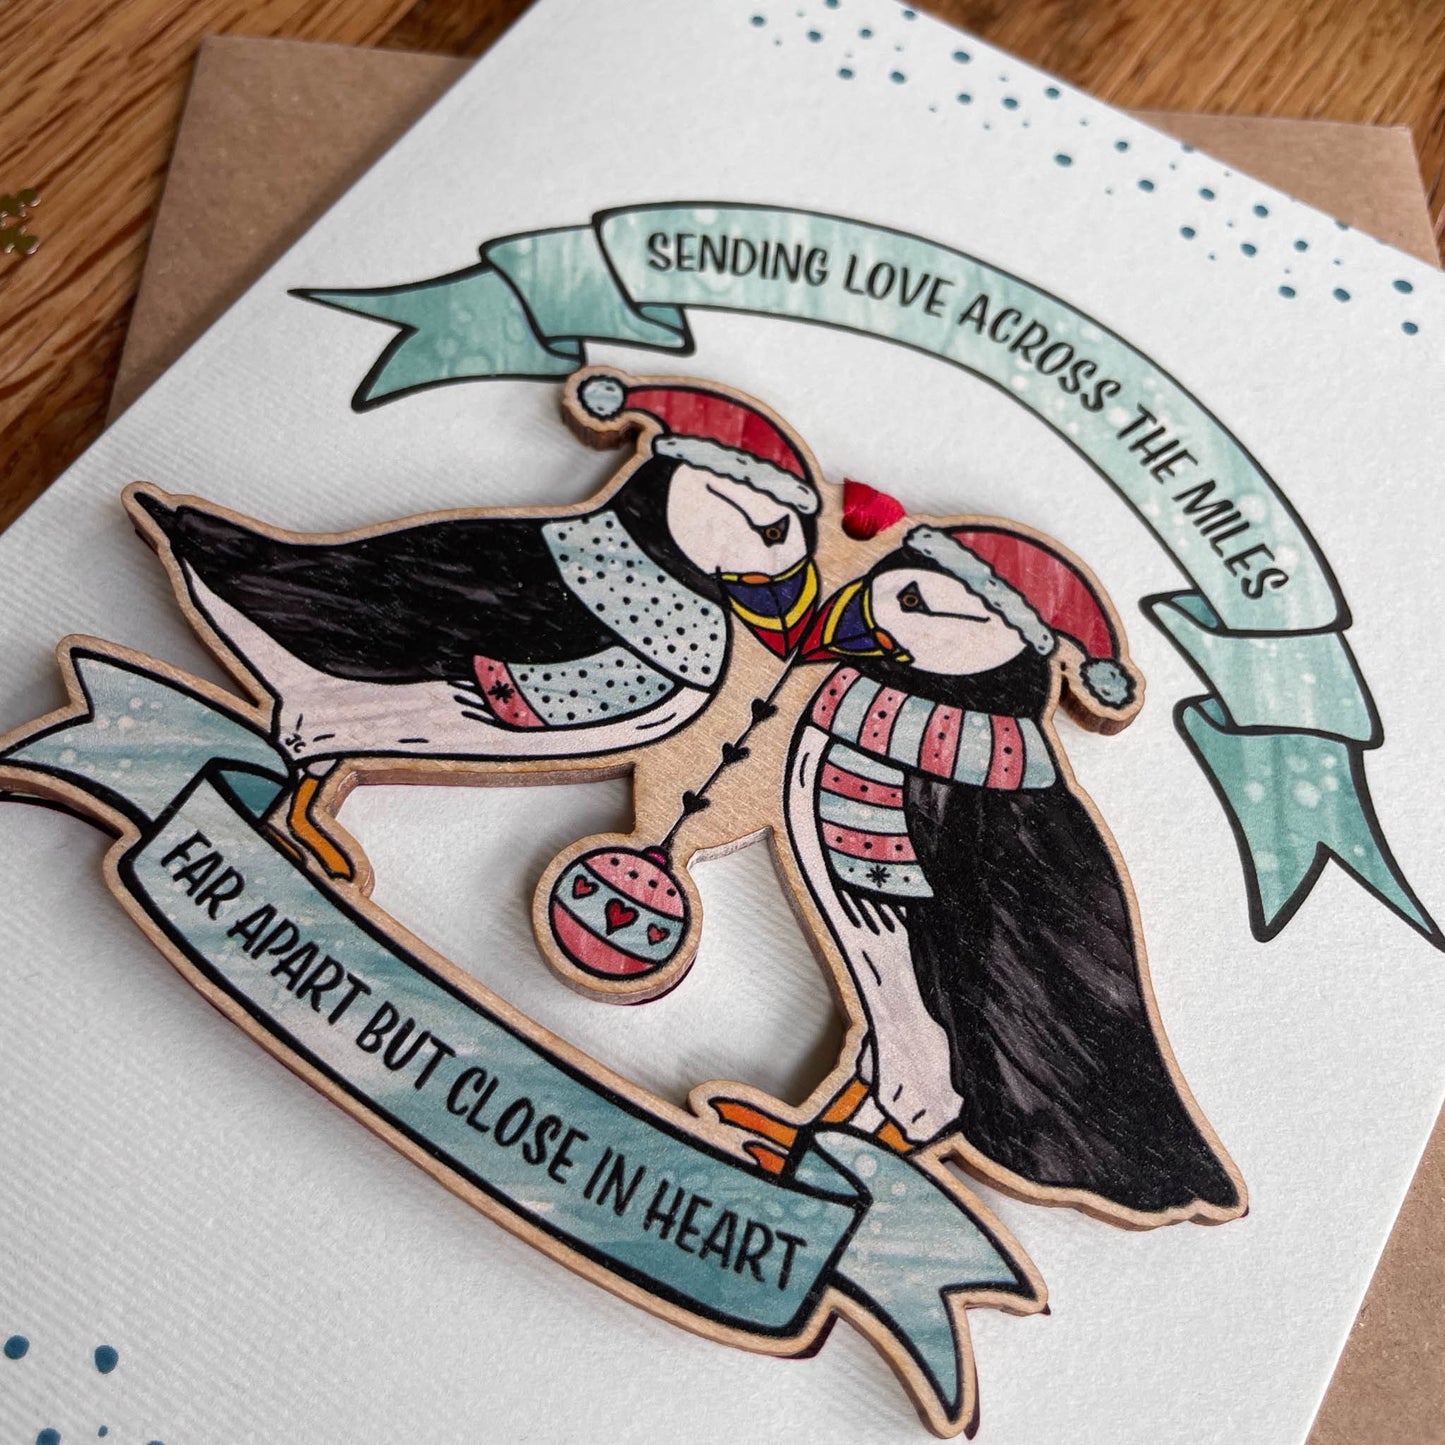 Sending love across the miles with this puffin decoration